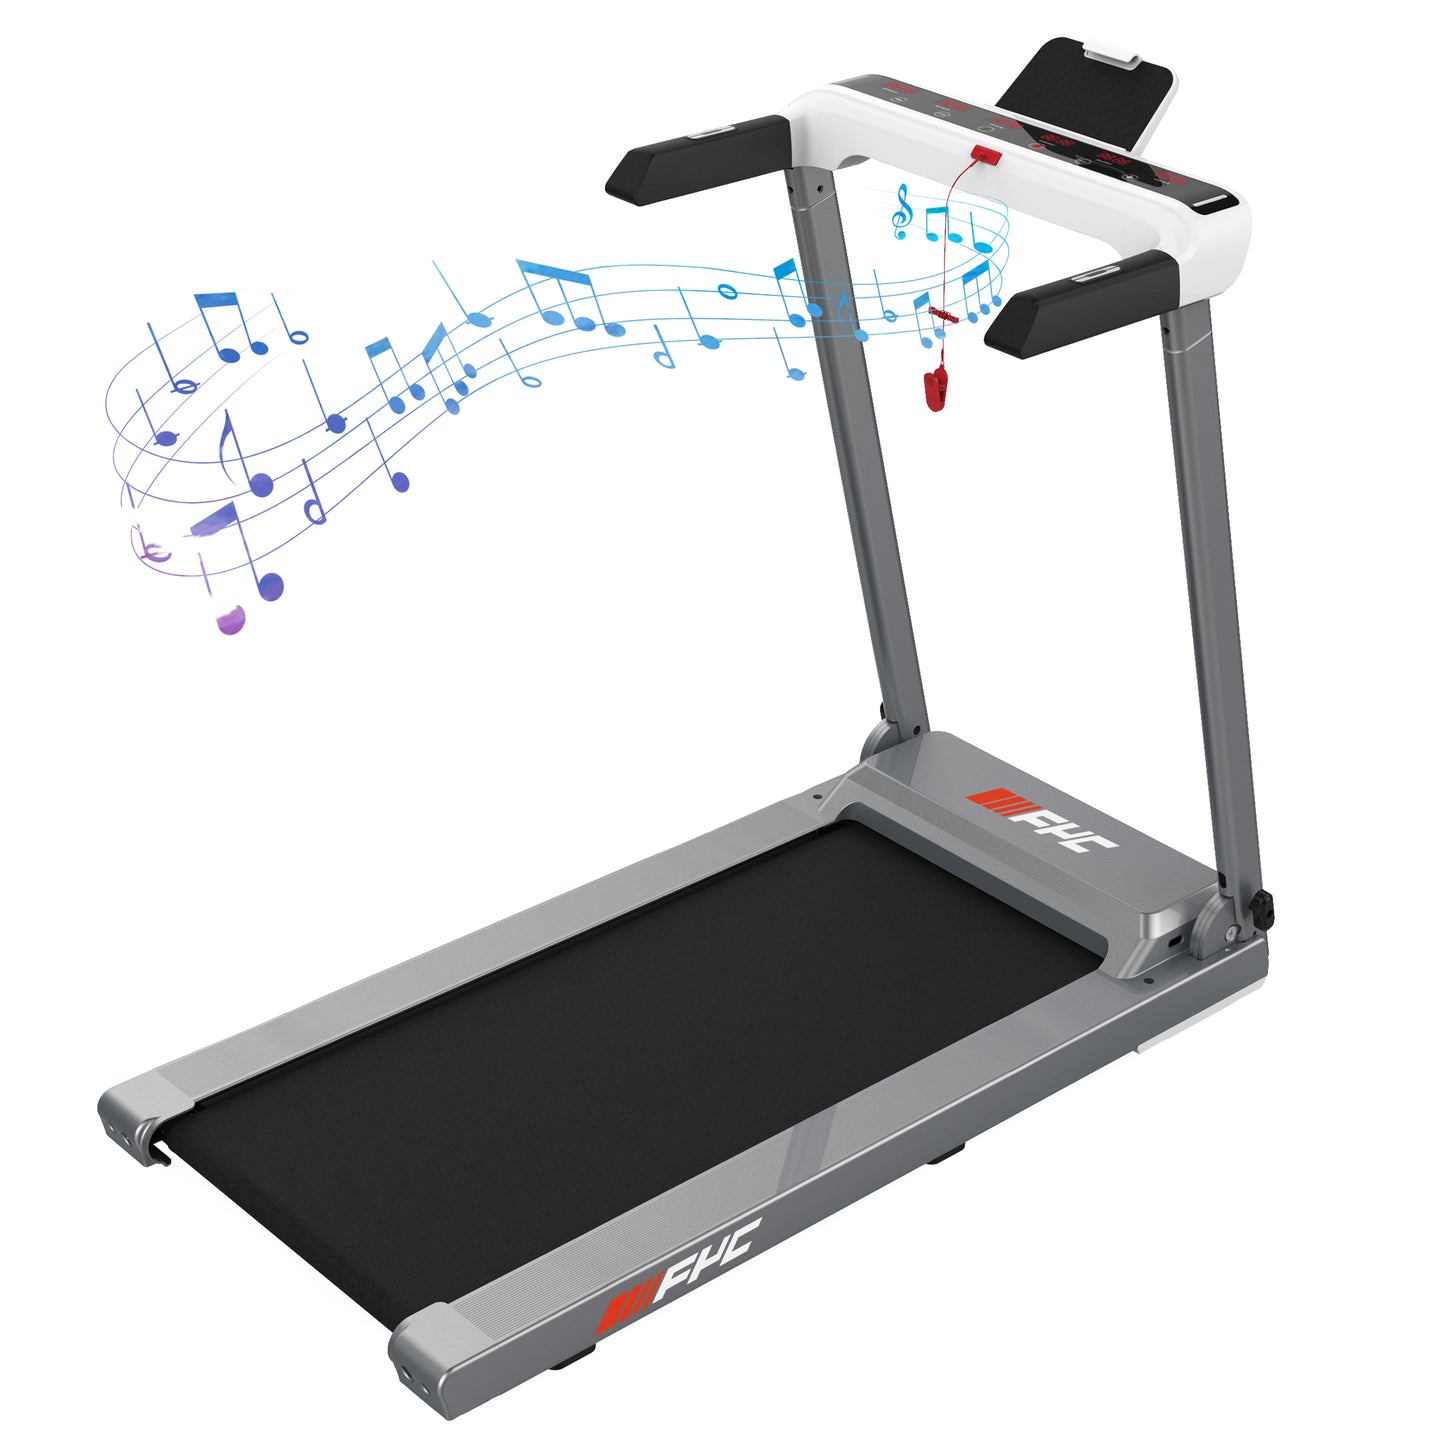 FYC Folding Treadmill for Home Electric Treadmill Running Exercise Machine Portable Compact Treadmill Foldable for Home Gym Fitness Workout Jogging Walking, No tallation Required